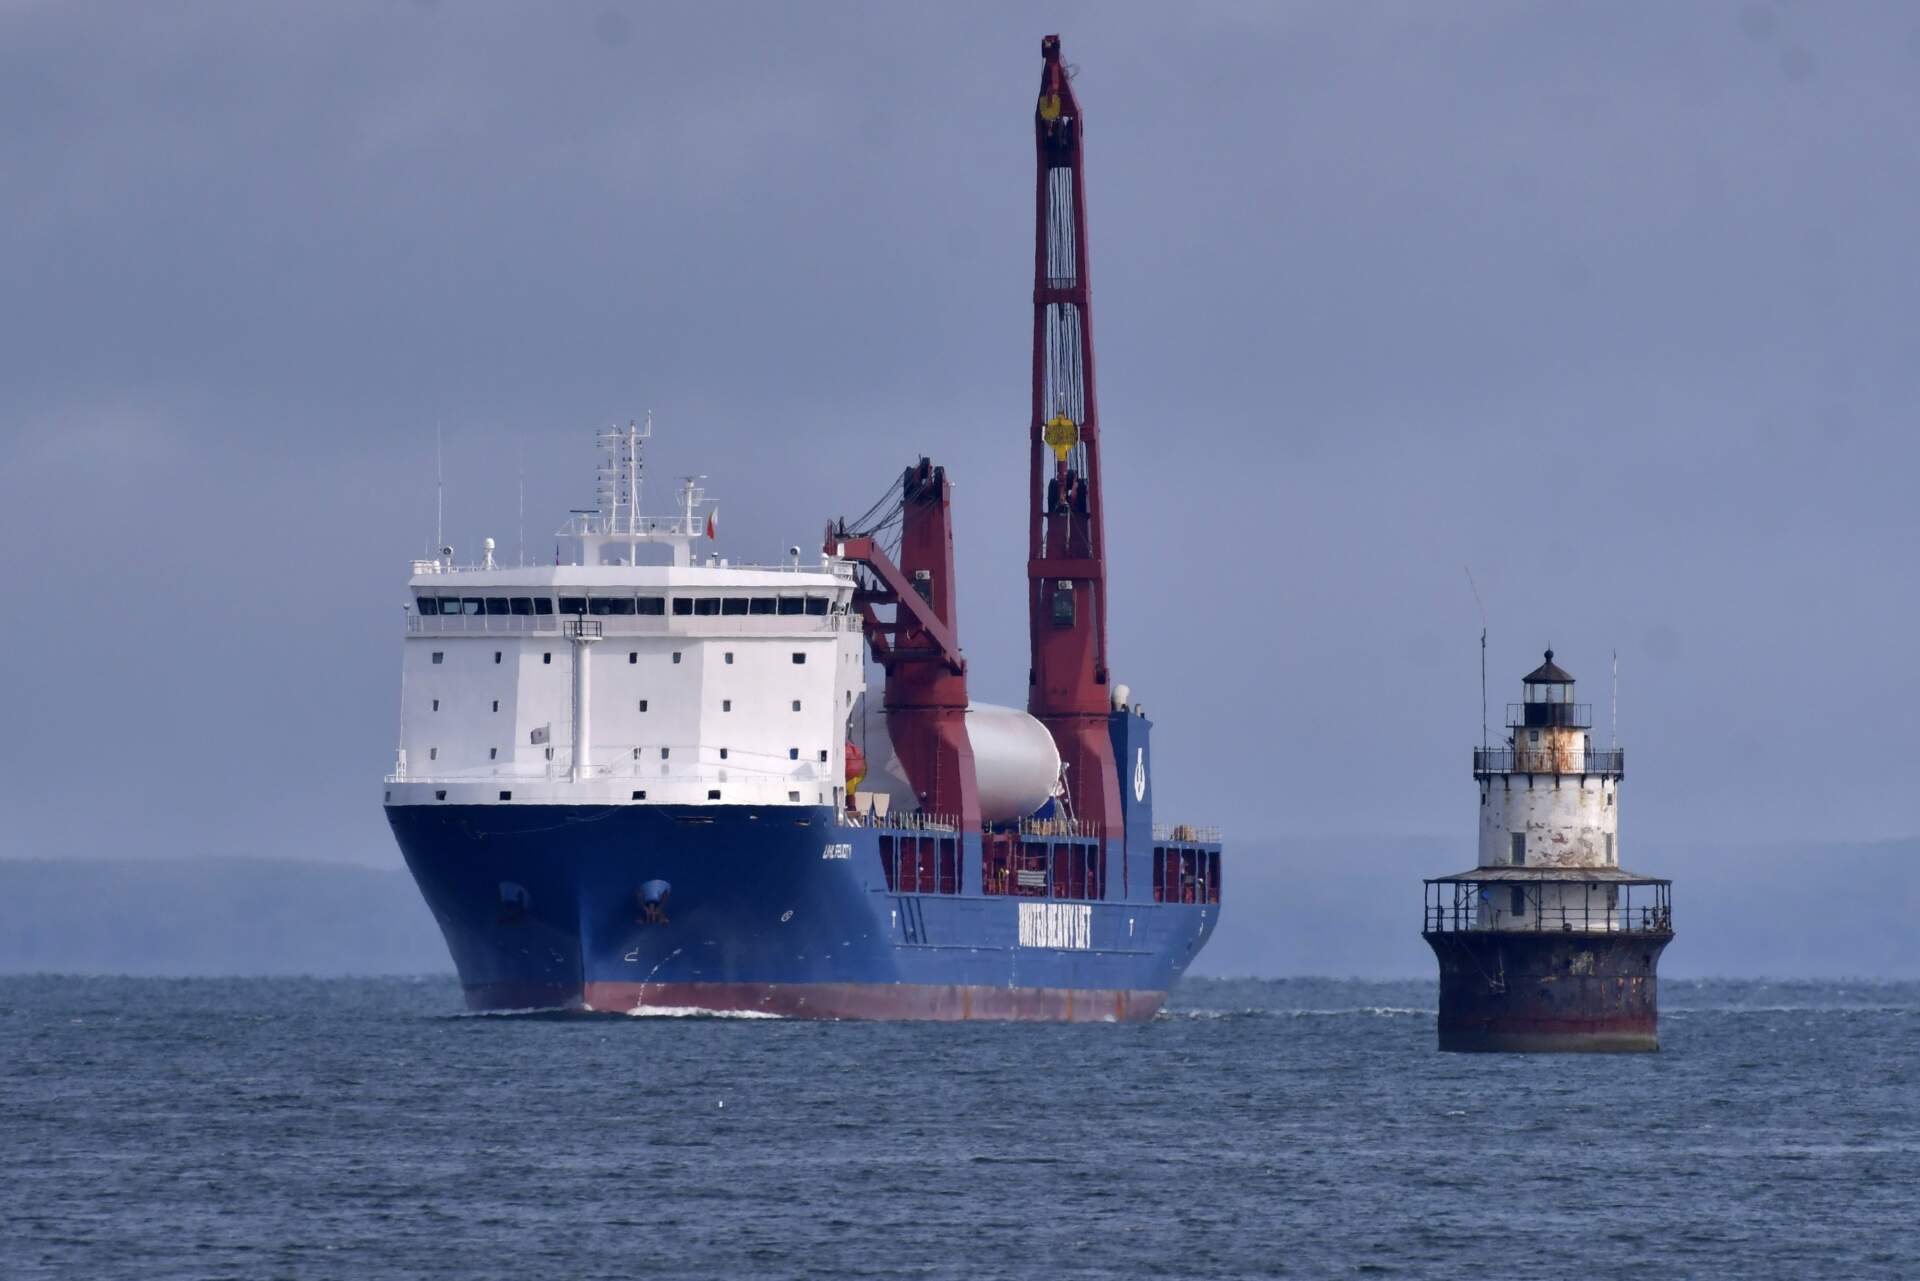 The ship UHL Felicity, carrying wind turbine tower sections, arrives in New Bedford. Once assembled by developer Vineyard Wind, the turbines at sea will stand more than 850 feet high. (Josh Reynolds/AP)